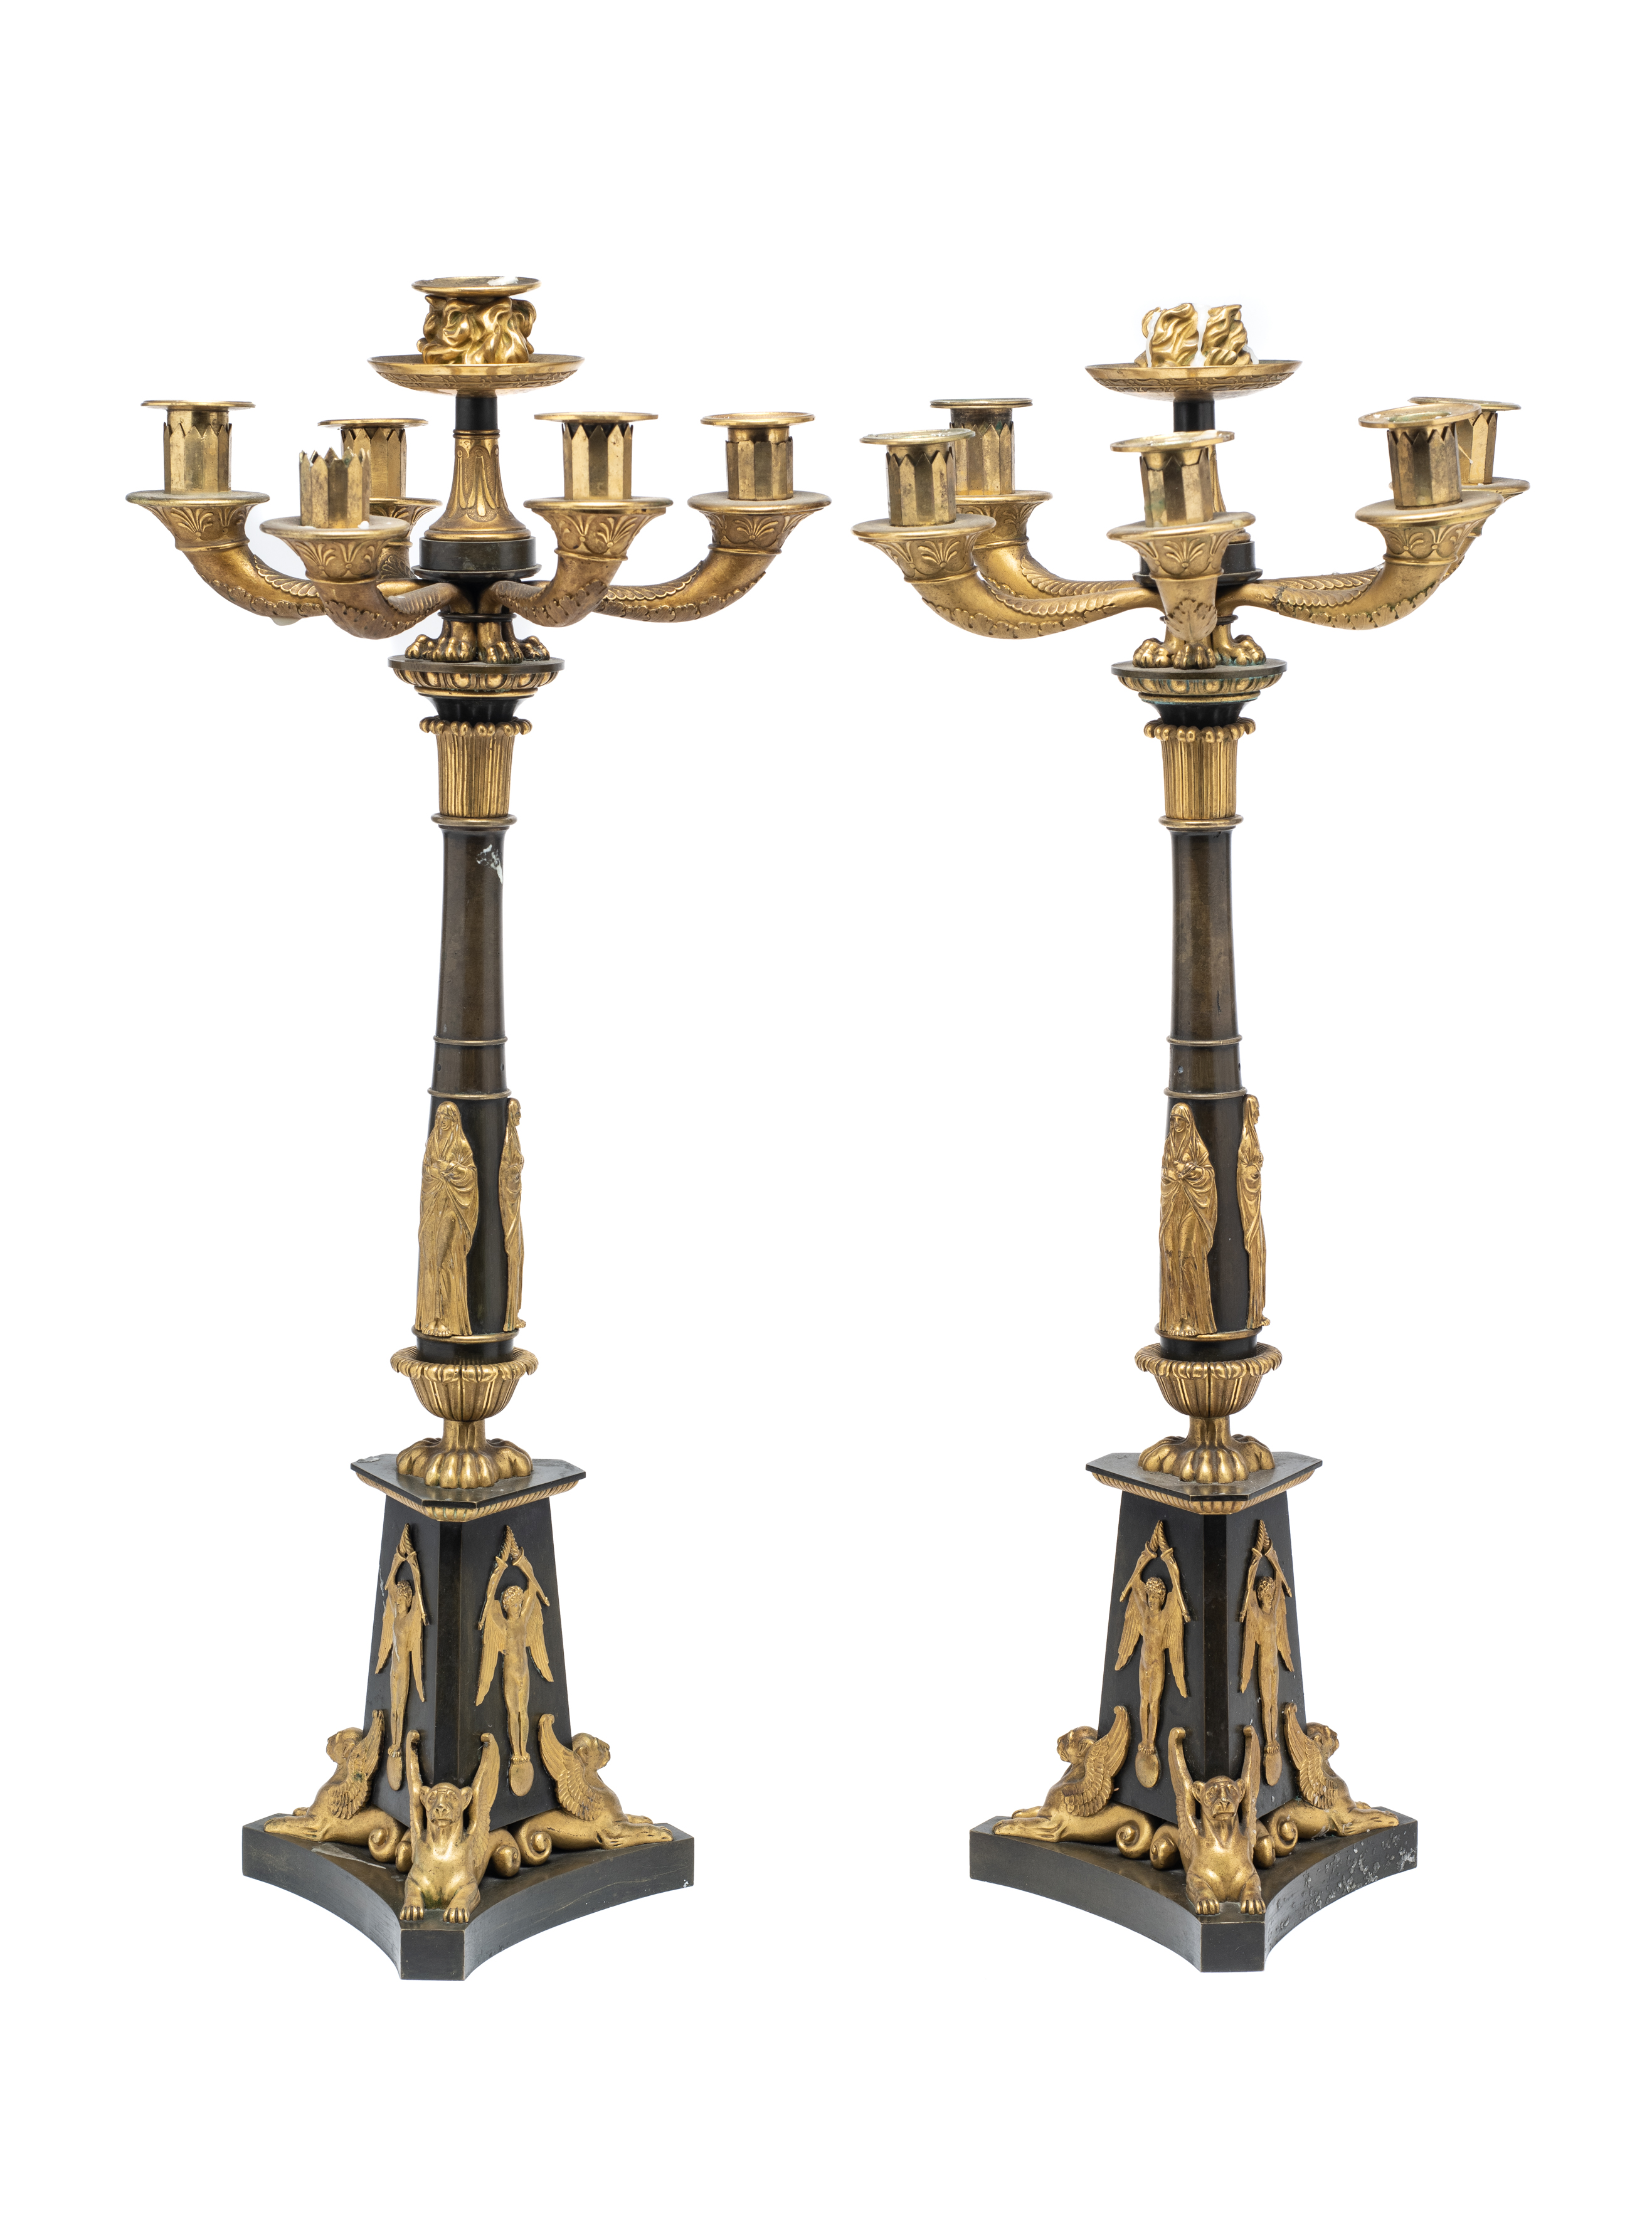 A PAIR OF FRENCH EMPIRE ORMOLU AND PATINATED BRONZE CANDELABRA